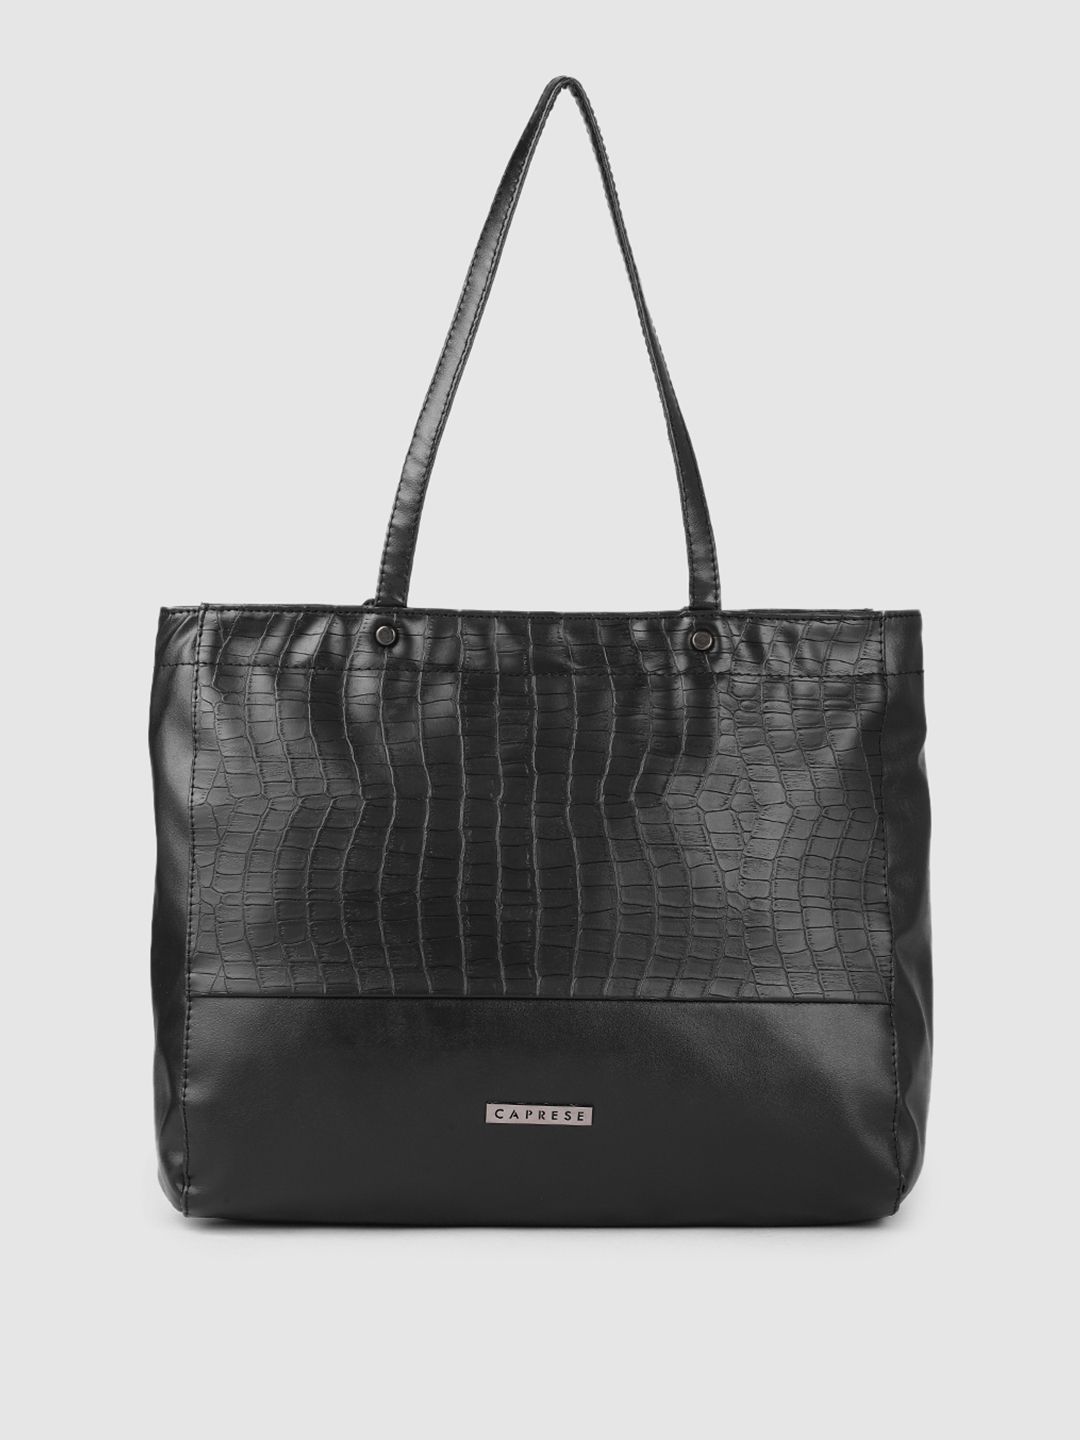 Caprese Black Solid Leather Regular Structured Shoulder Bag with Animal Textured Detail Price in India